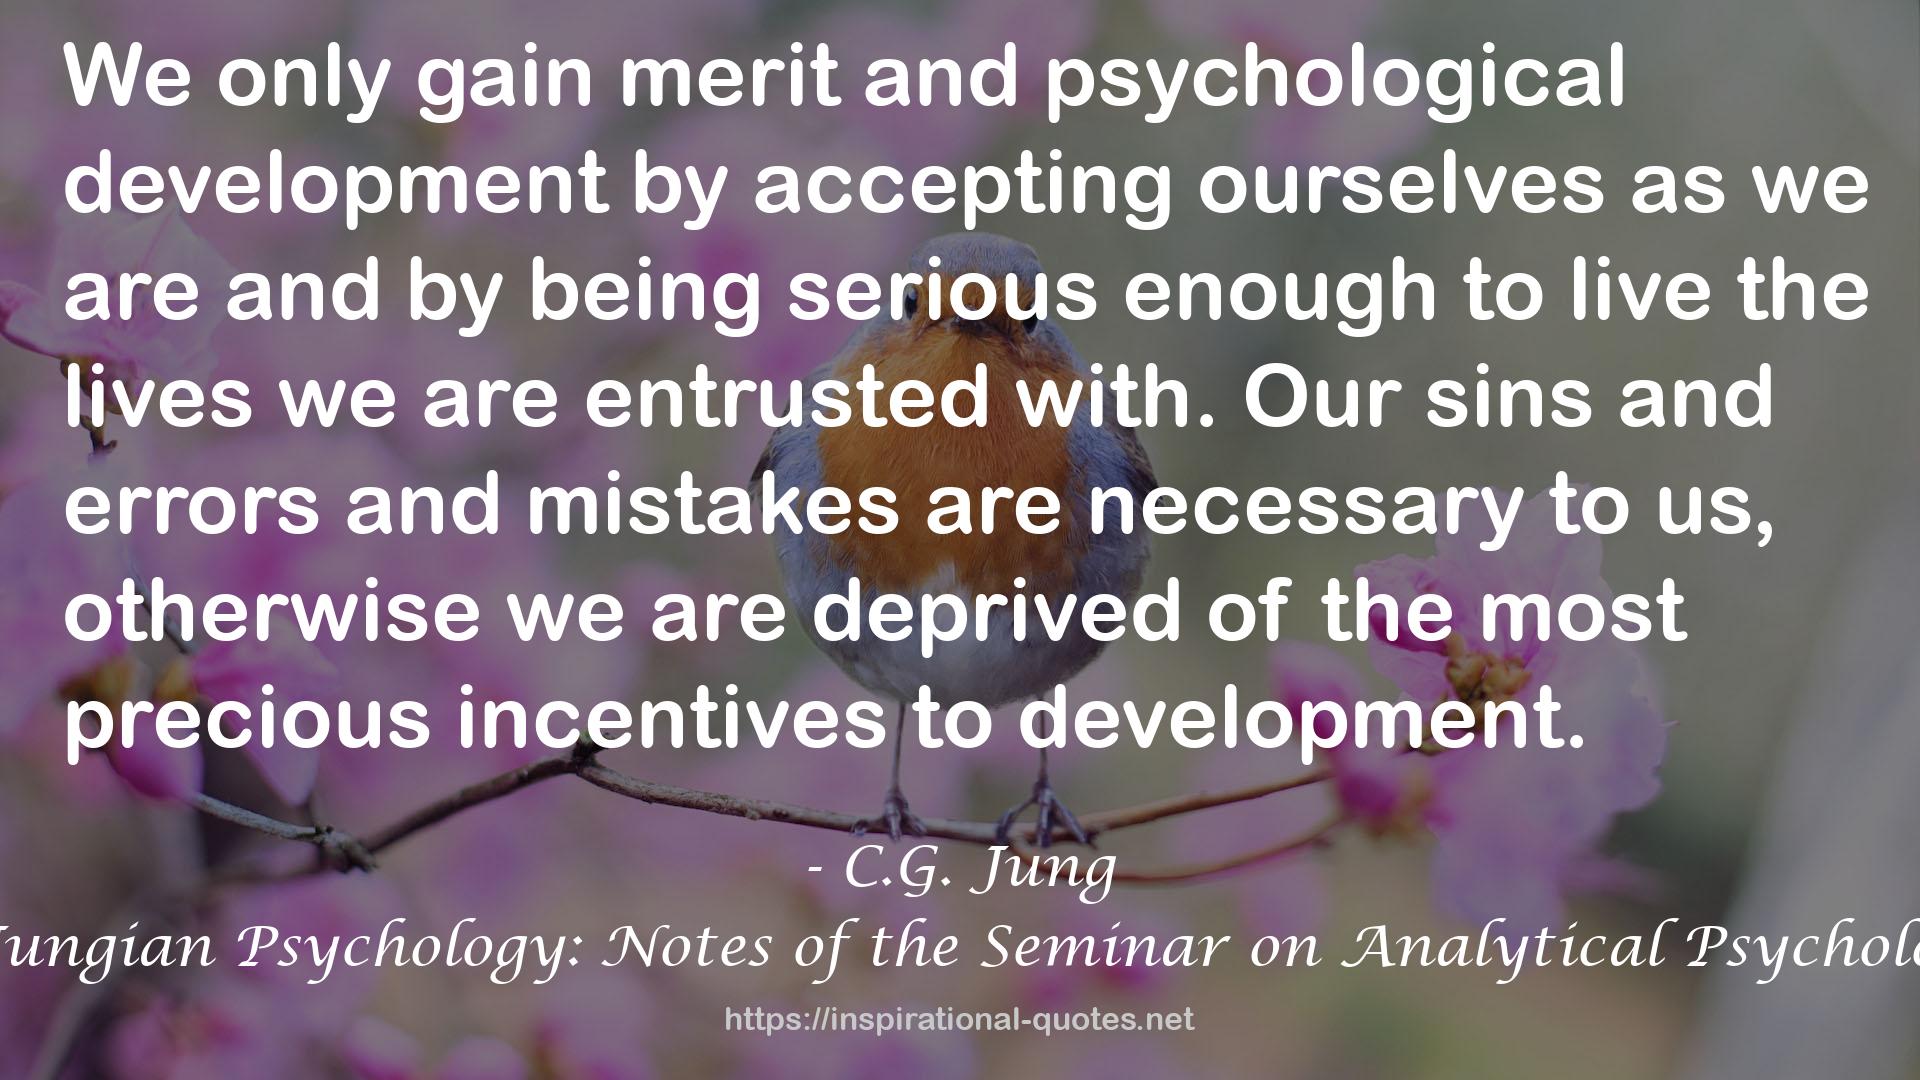 Introduction to Jungian Psychology: Notes of the Seminar on Analytical Psychology Given in 1925 QUOTES